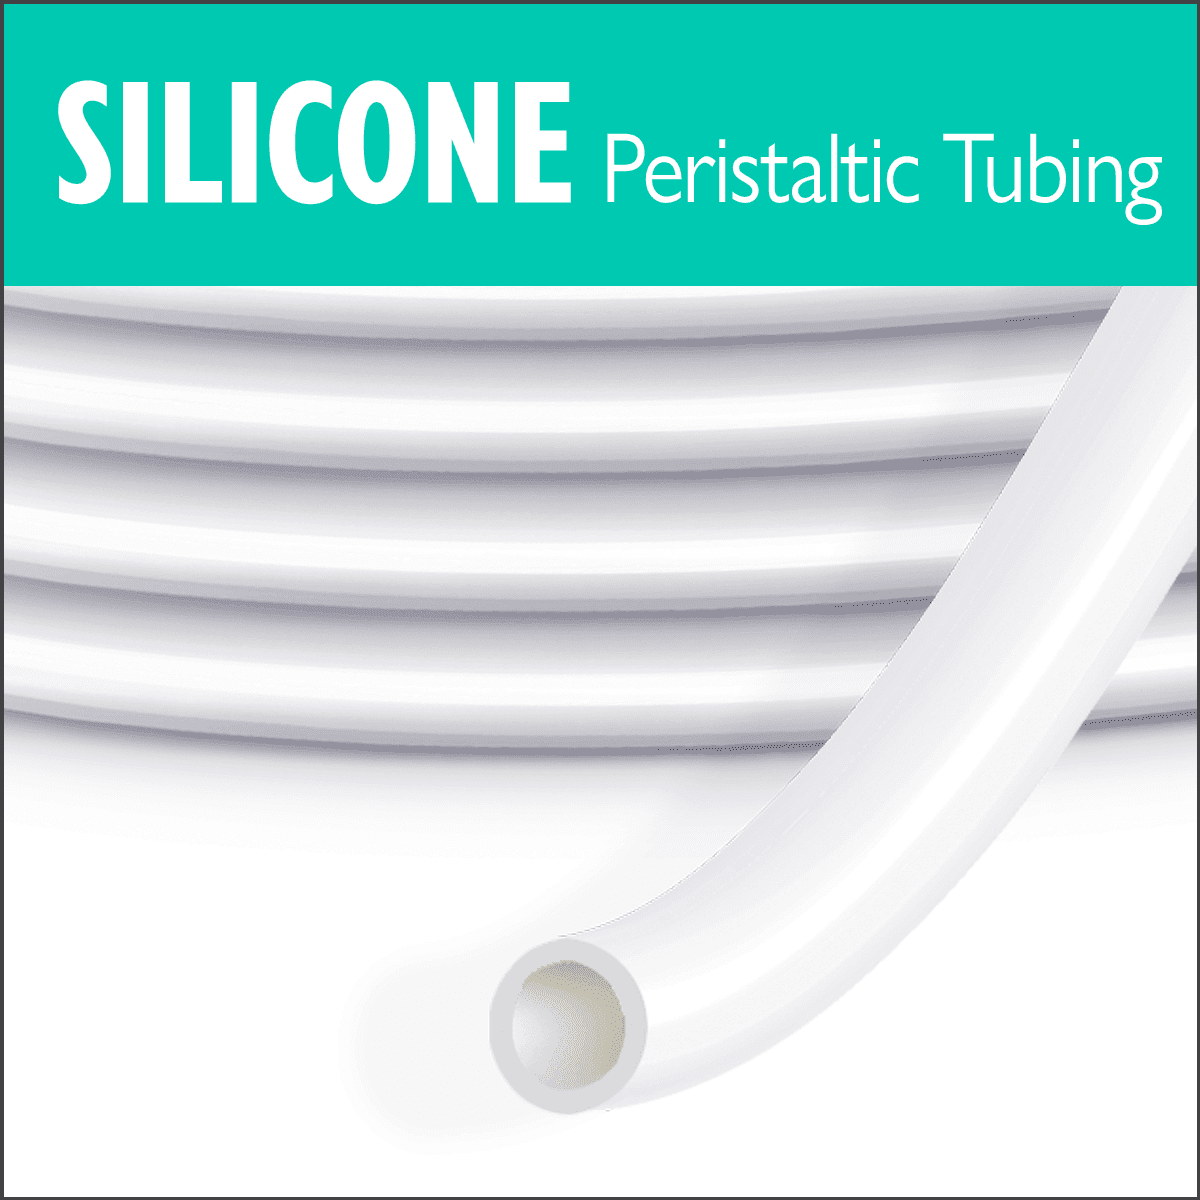 Silicone (Platinum Cured) Tubing for Peristaltic Pump for Sampling Groundwater